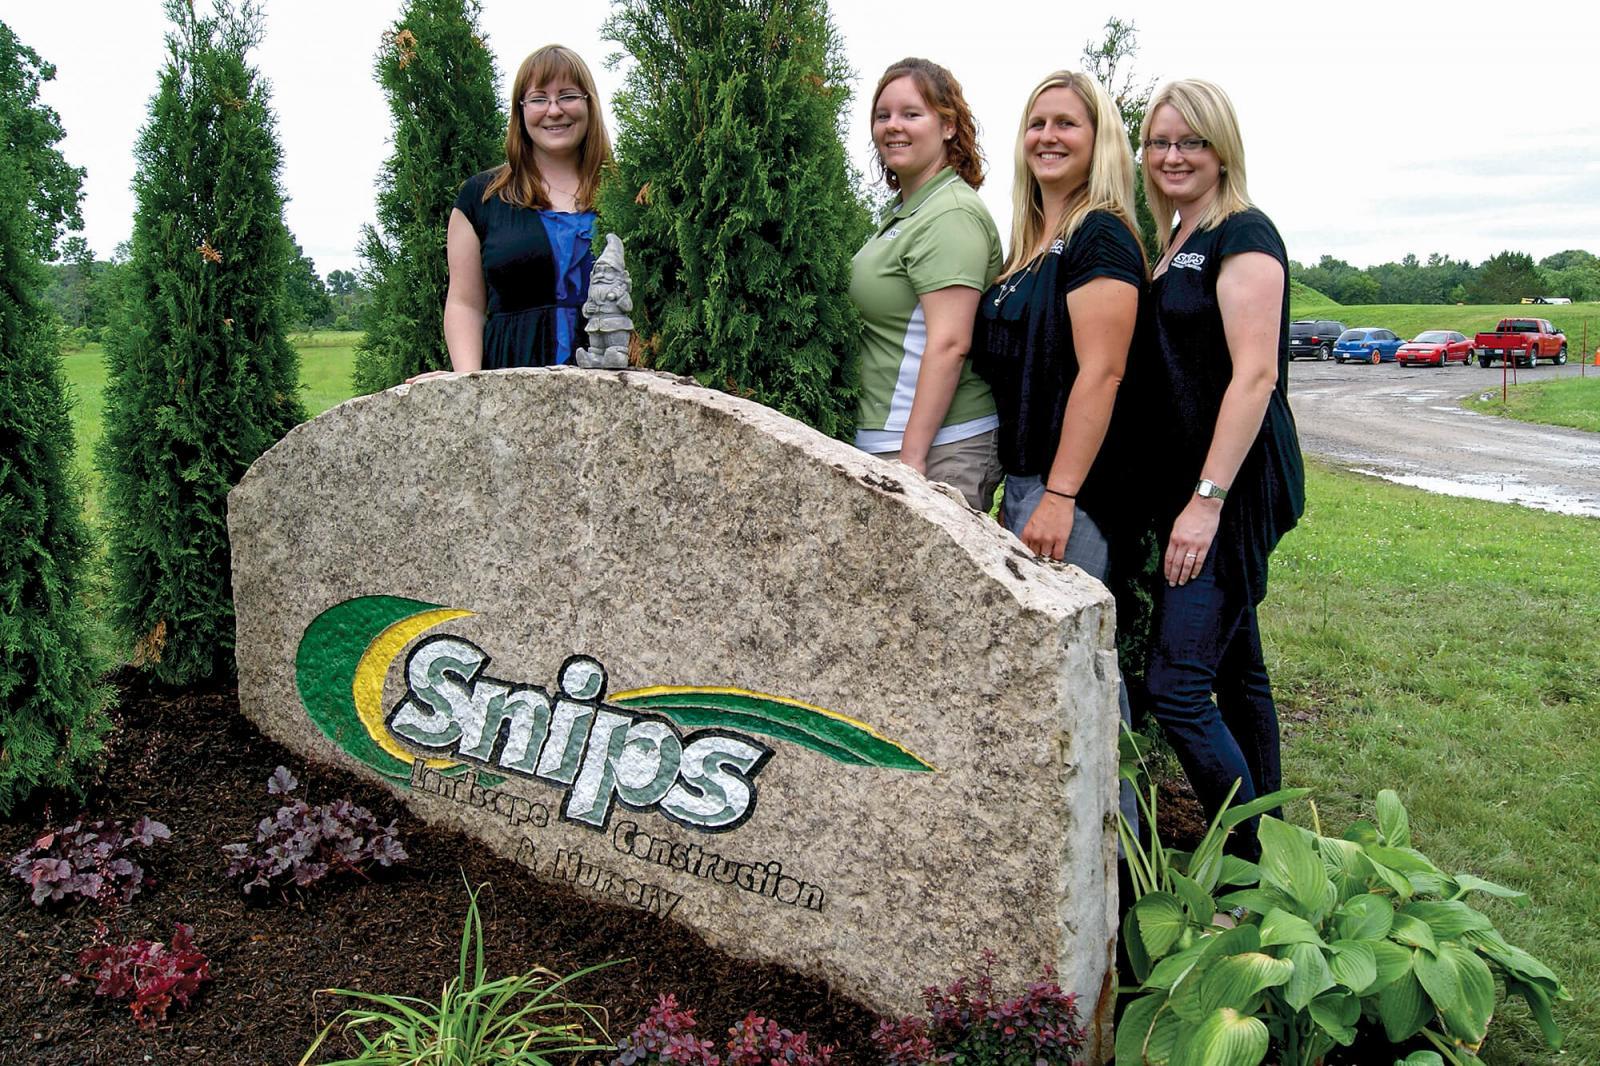 The ladies of Snips Landscape and Nursery, Alena Dawson, Tasha Beck, Kristi Montovani and Laura DeGraff, pose with what they call the tombstone, which greets visitors to Snips Landscape’s 10-acre site just outside Welland.